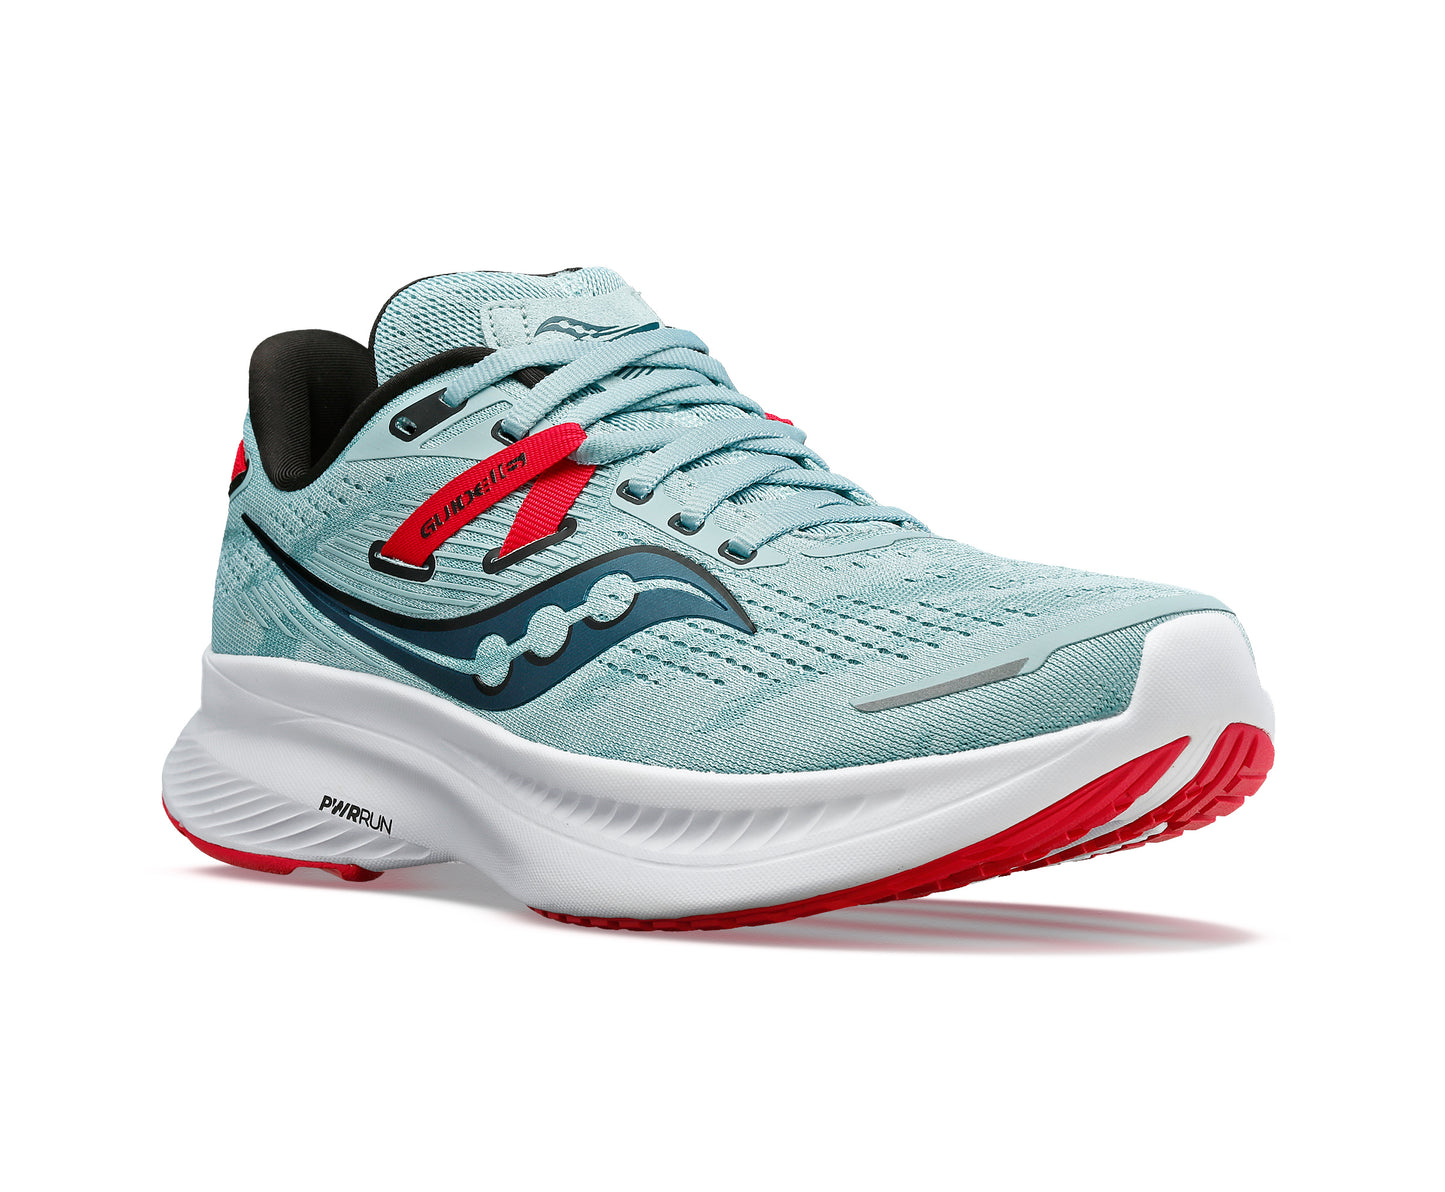 Saucony Guide 16 women's stability running shoe light blue, red, white